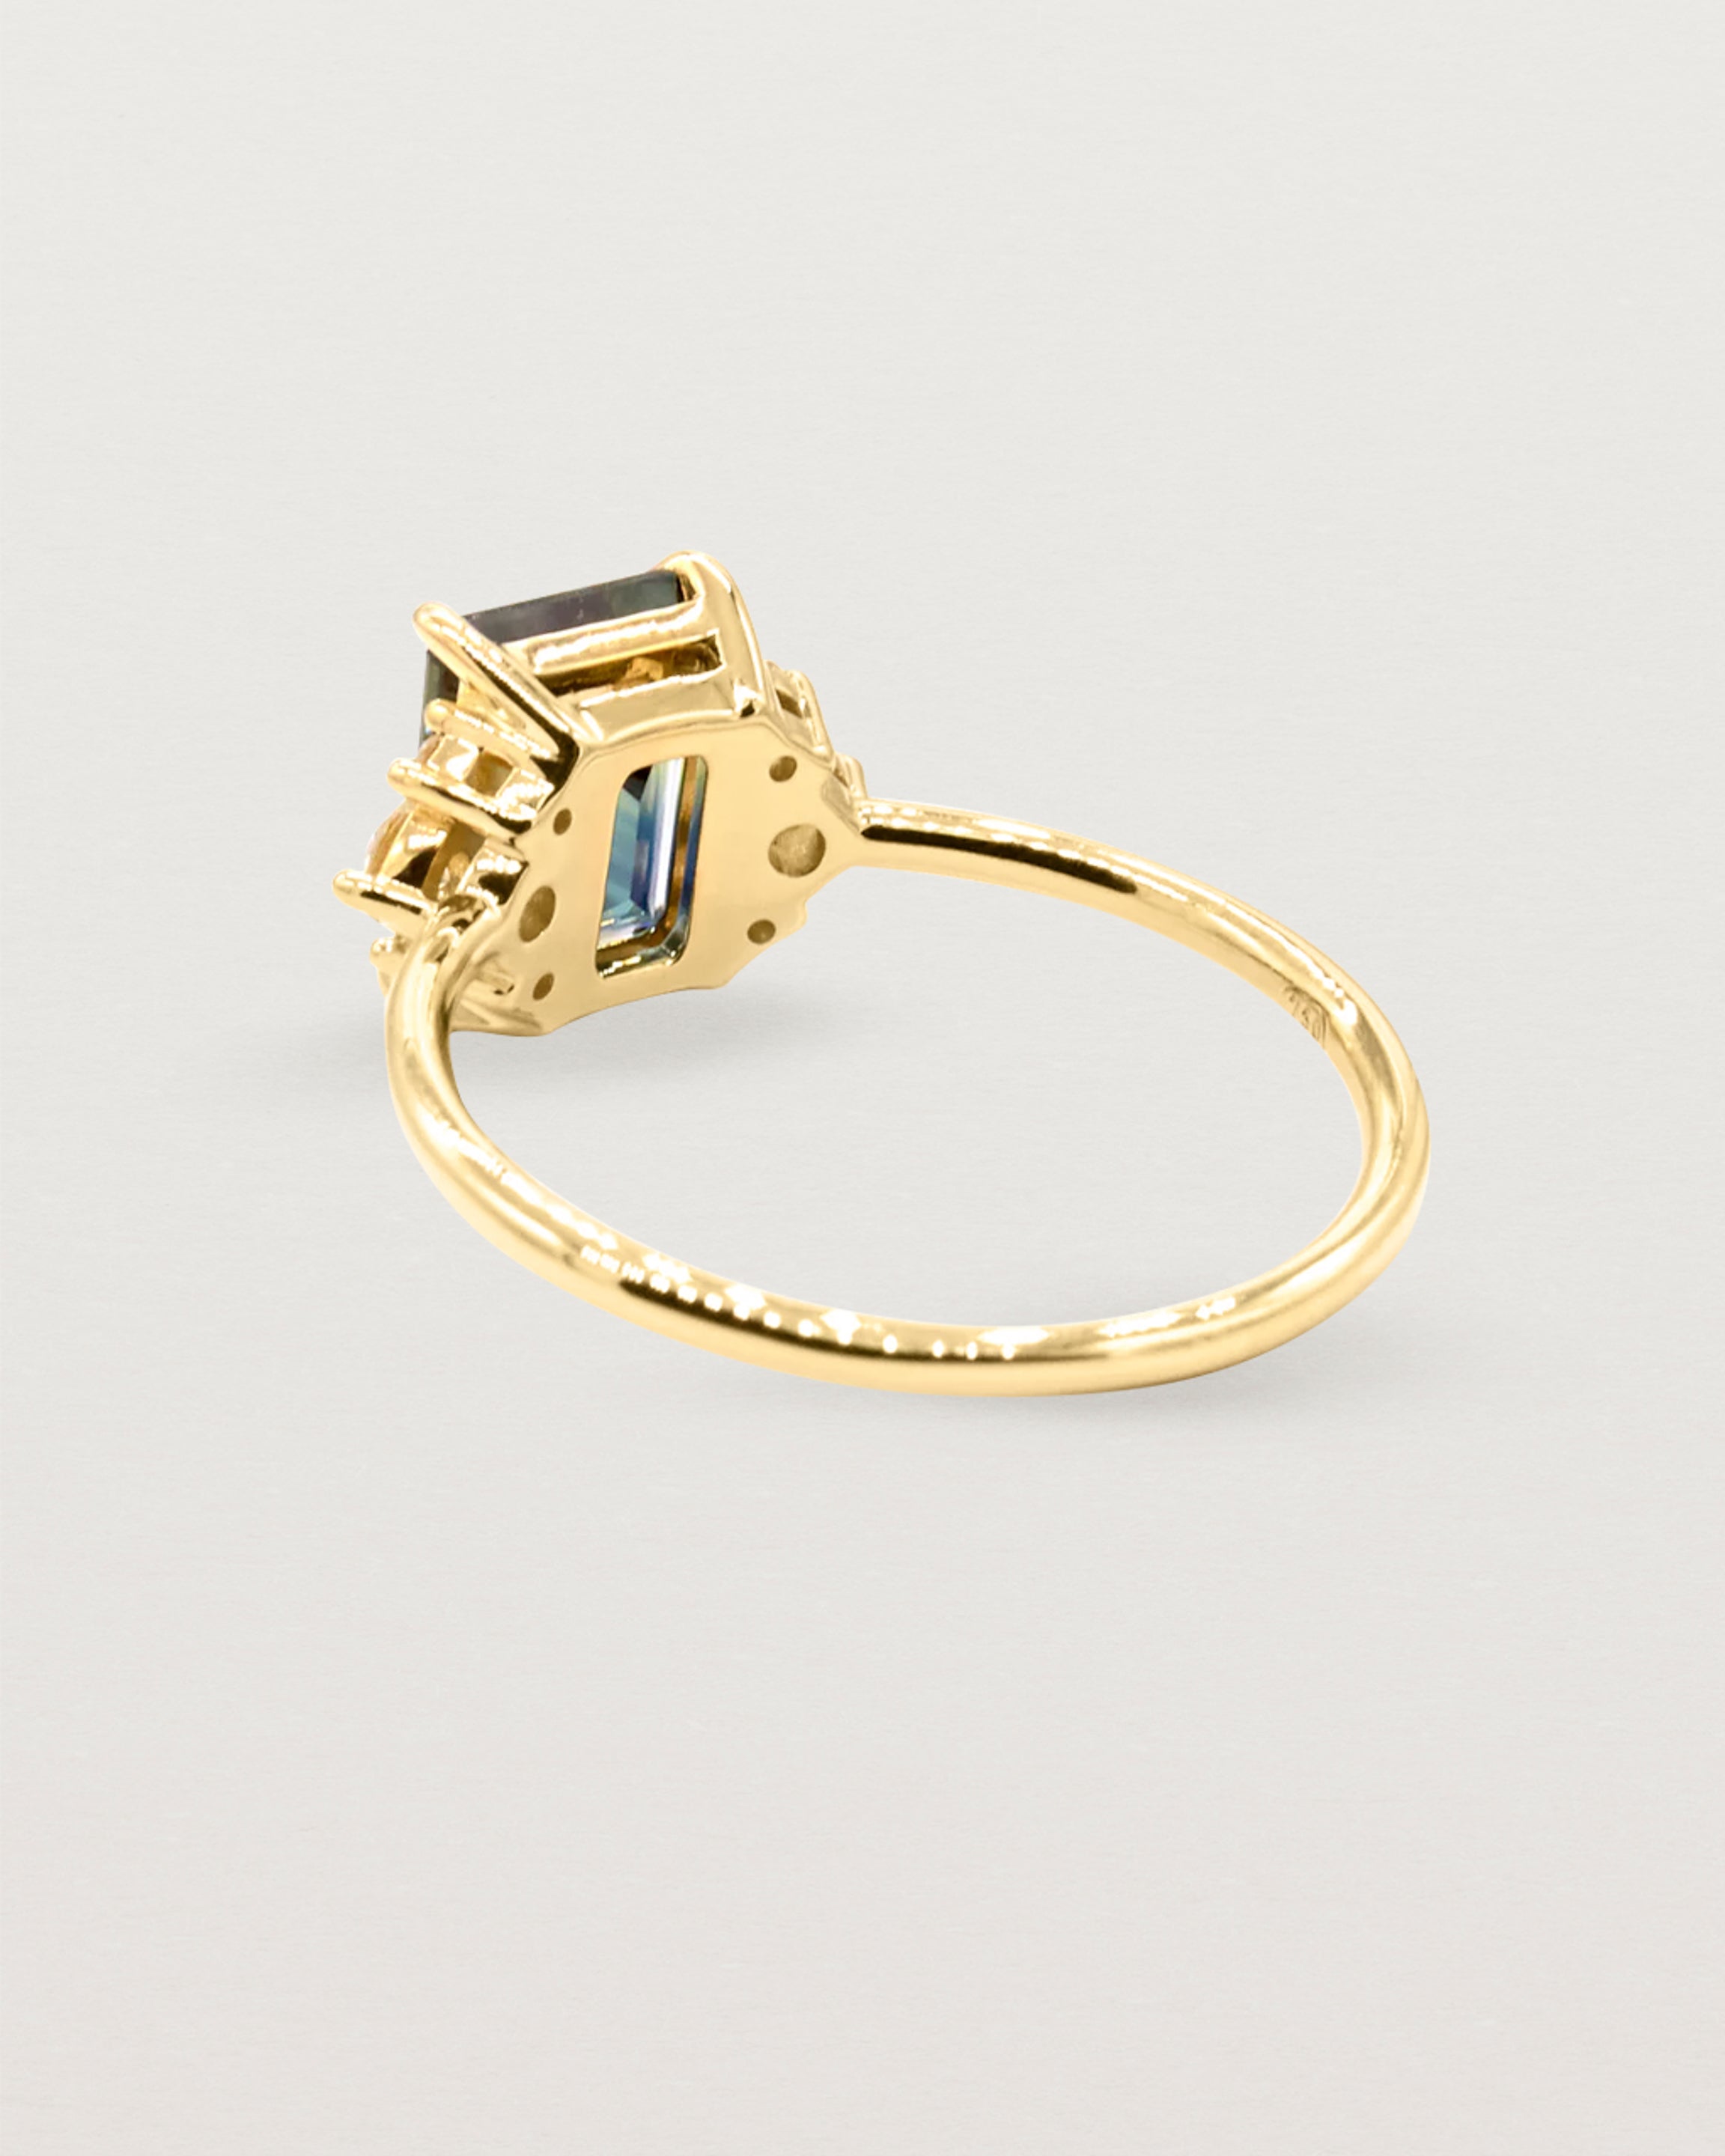 The back view of a cluster ring crafted in yellow gold